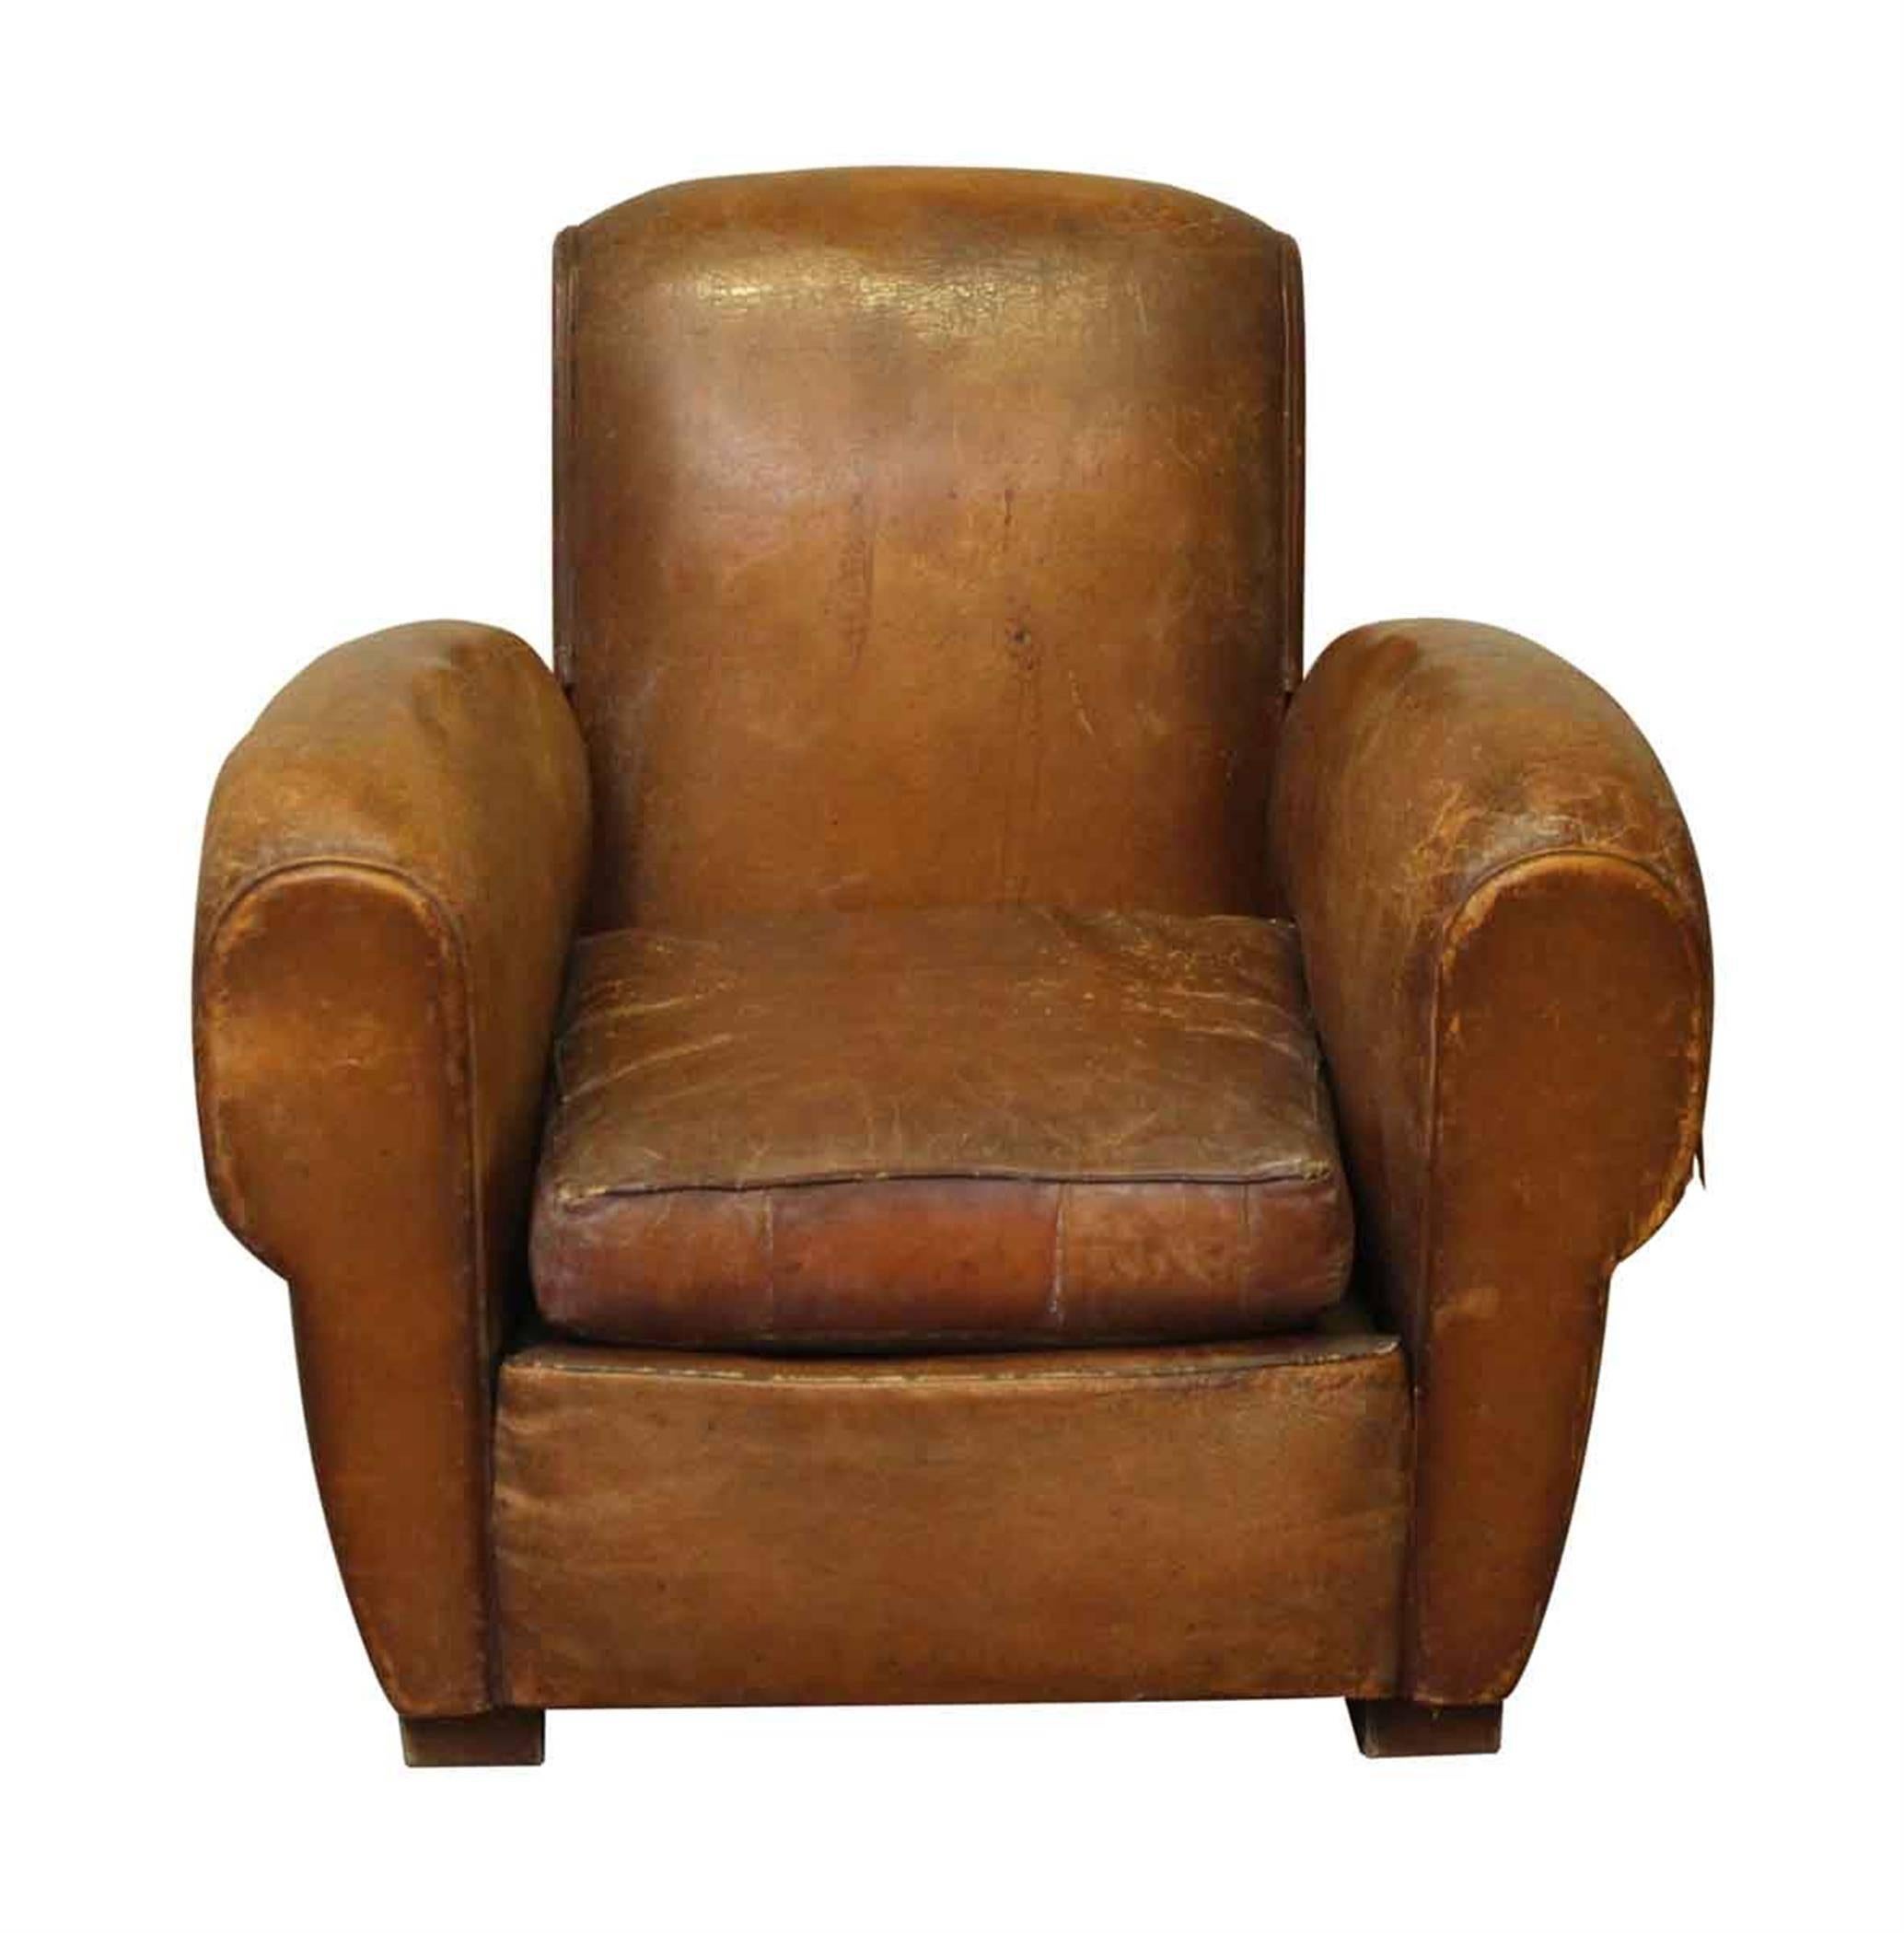 1970s French brown leather club chair with thick arms and studded detail on the back. There is some wear from age and use.